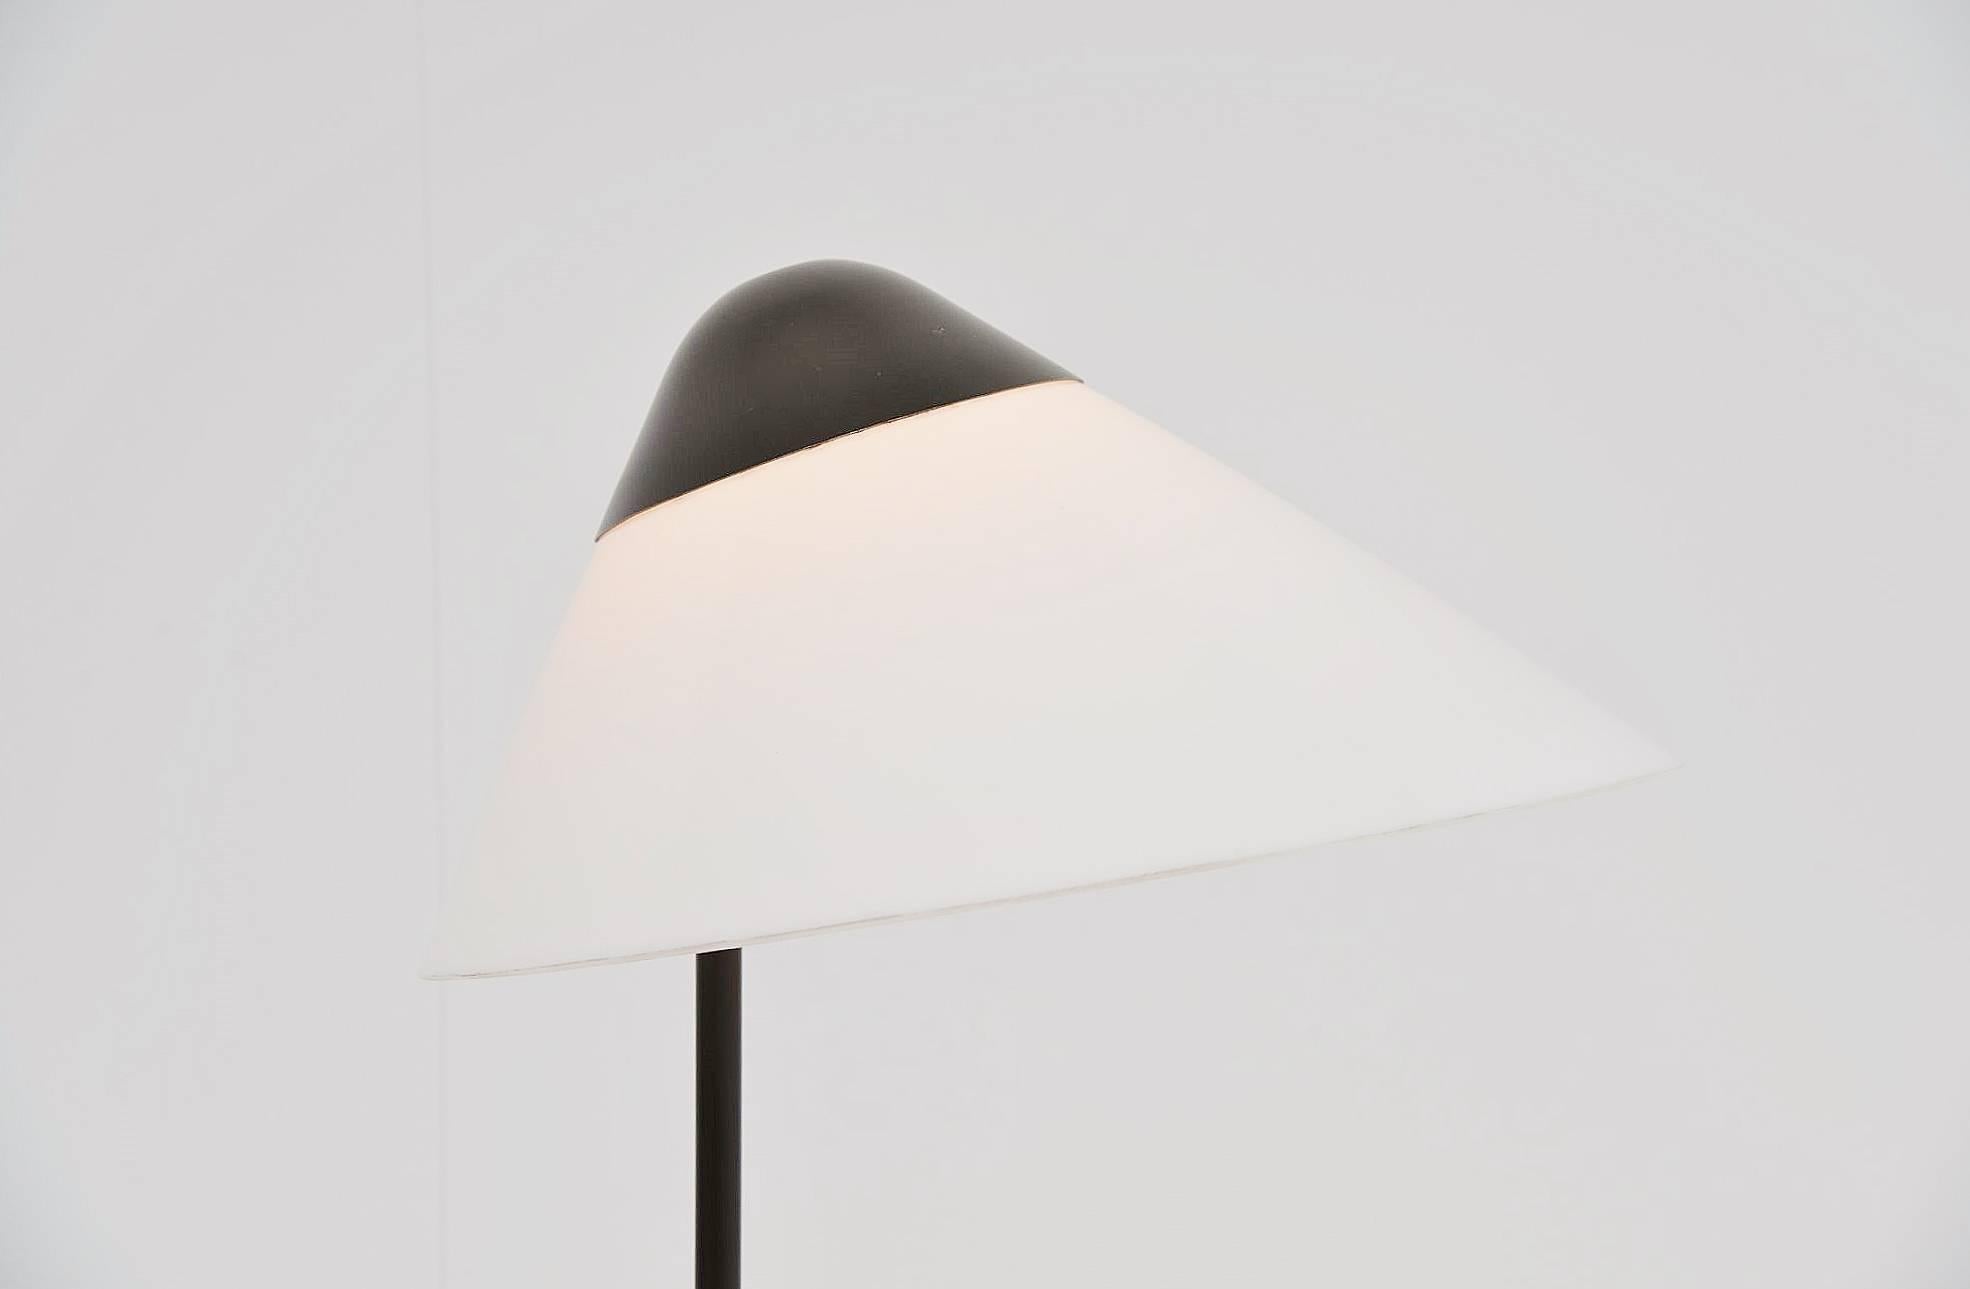 Very nice table lamp designed by Hans J. Wegner for Louis Poulsen, Denmark 1975. This table lamp has a grey or brown lacquer finish and a white plexiglass shade. This lamp gives very nice diffused light when lit. This is an original early edition in